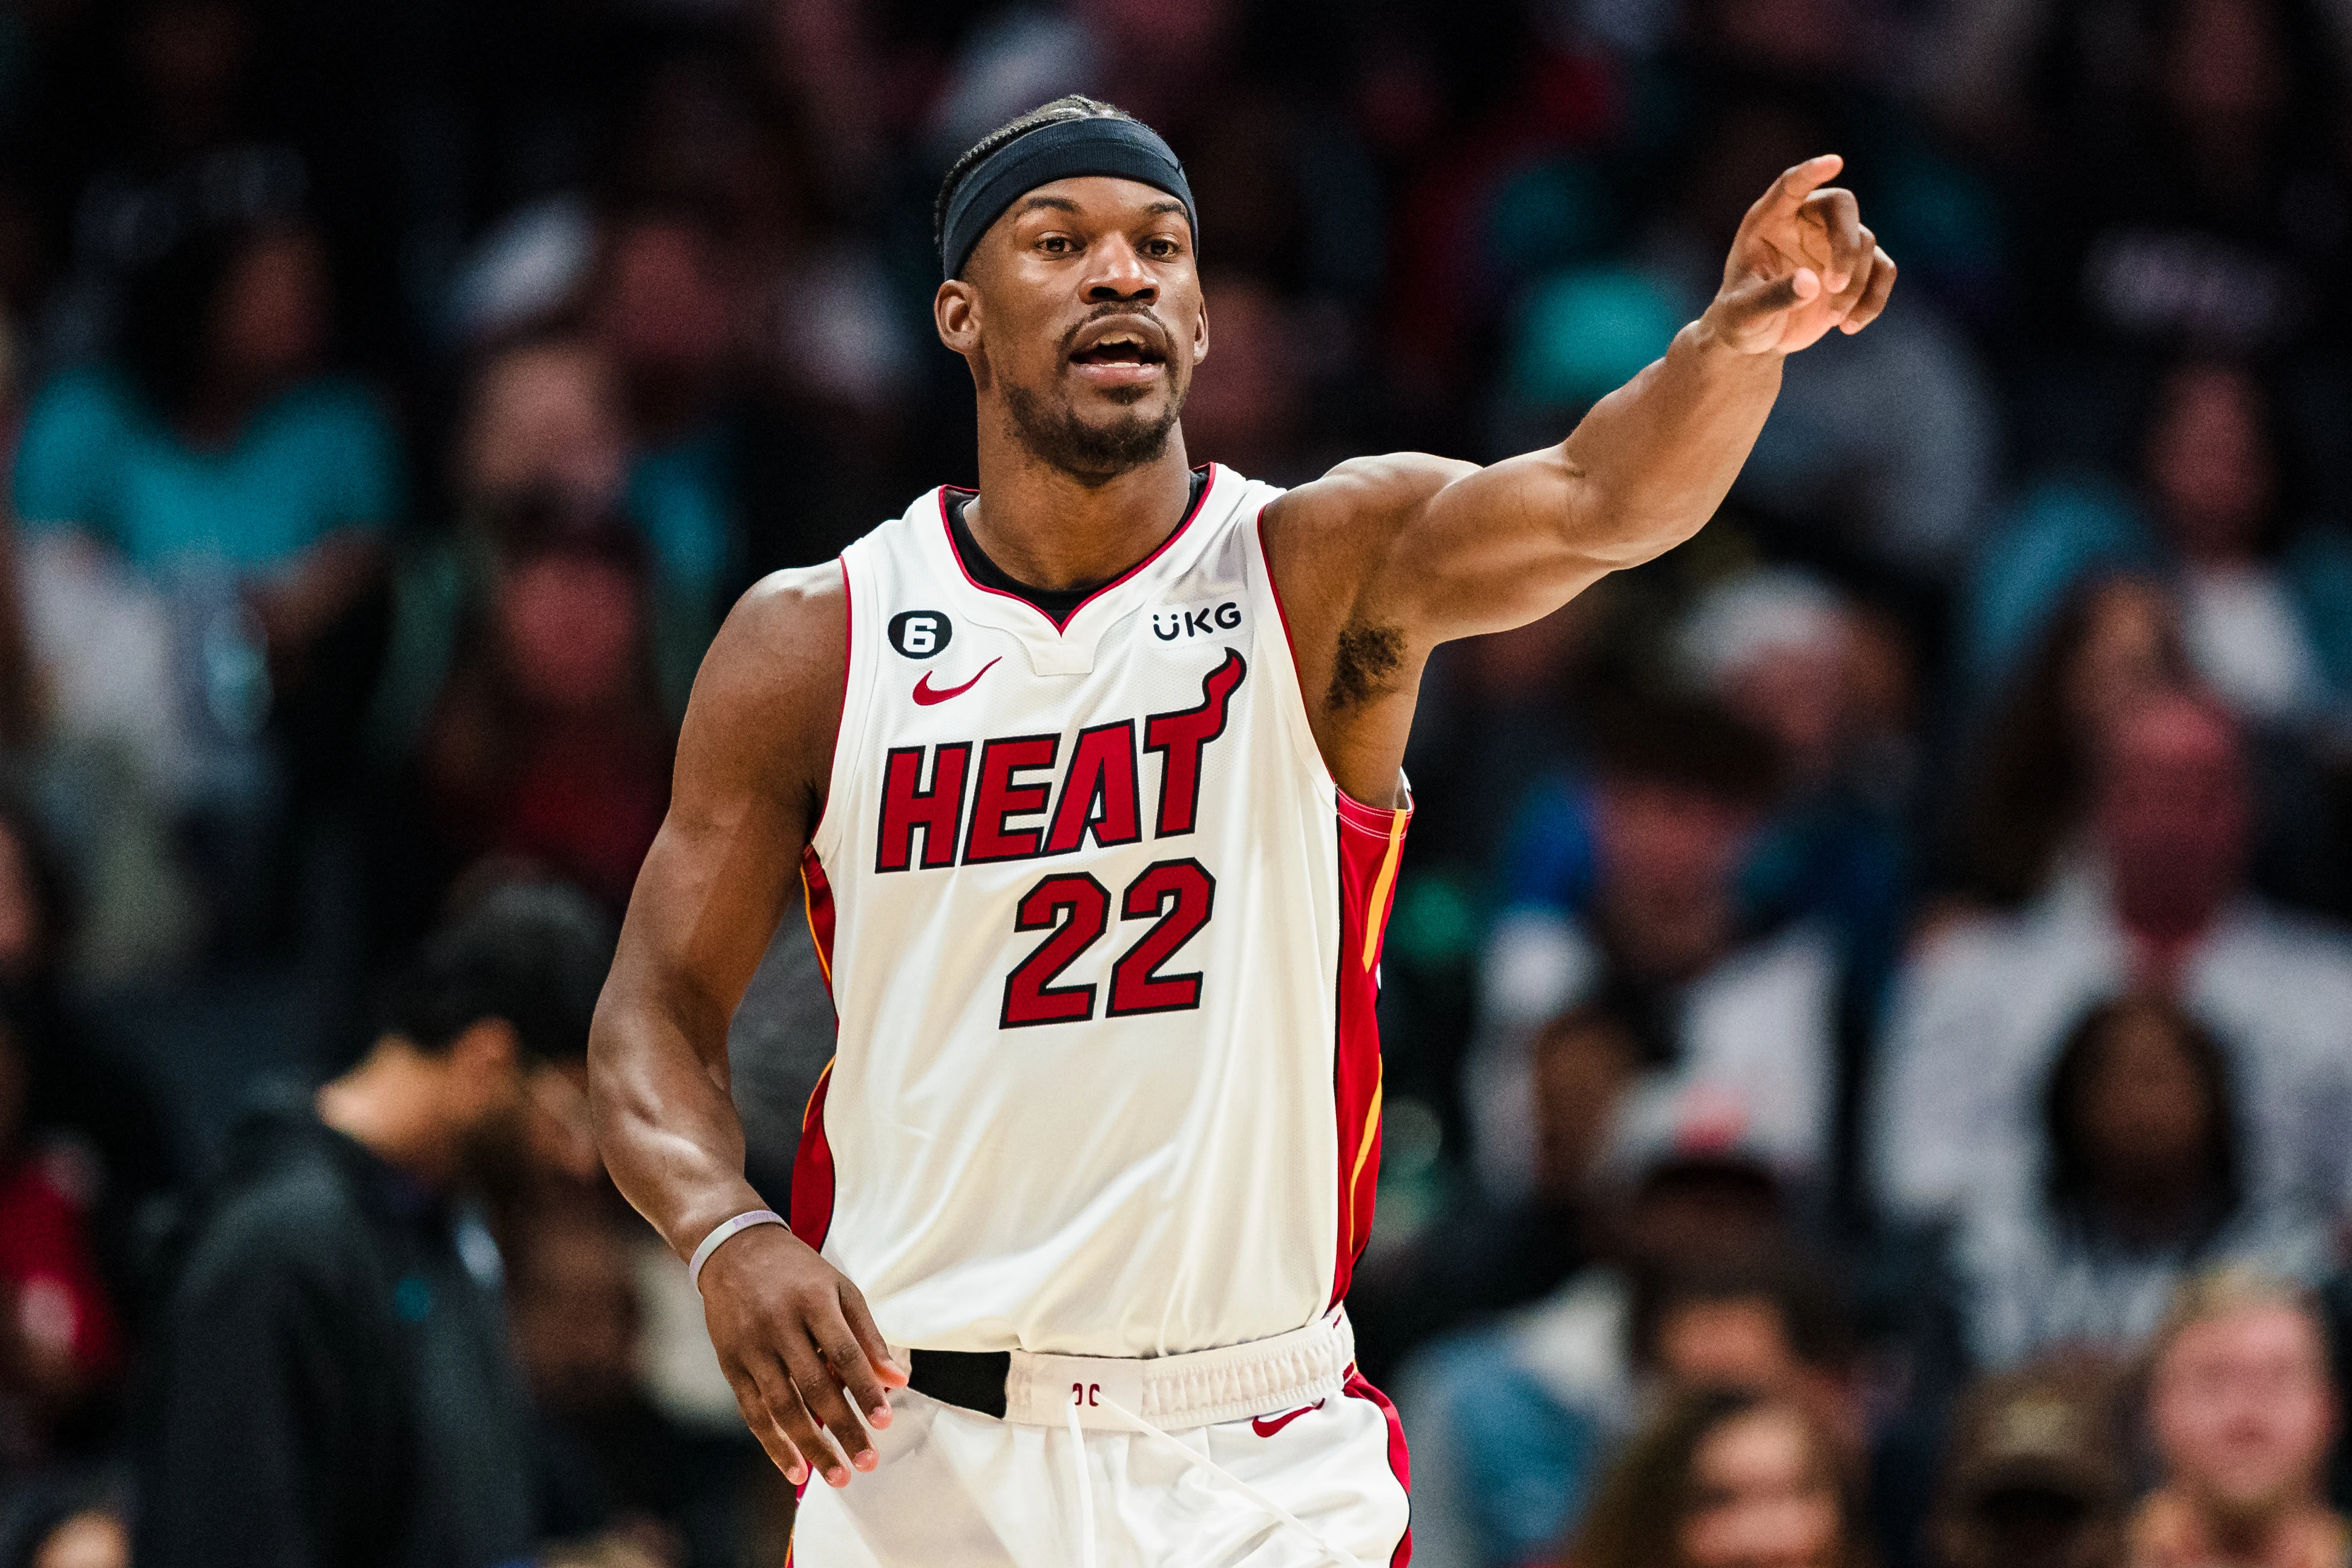 Jimmy Butler #22 of the Miami Heat directs a play against the Charlotte Hornets during their game at Spectrum Center on February 25, 2023 in Charlotte, North Carolina.